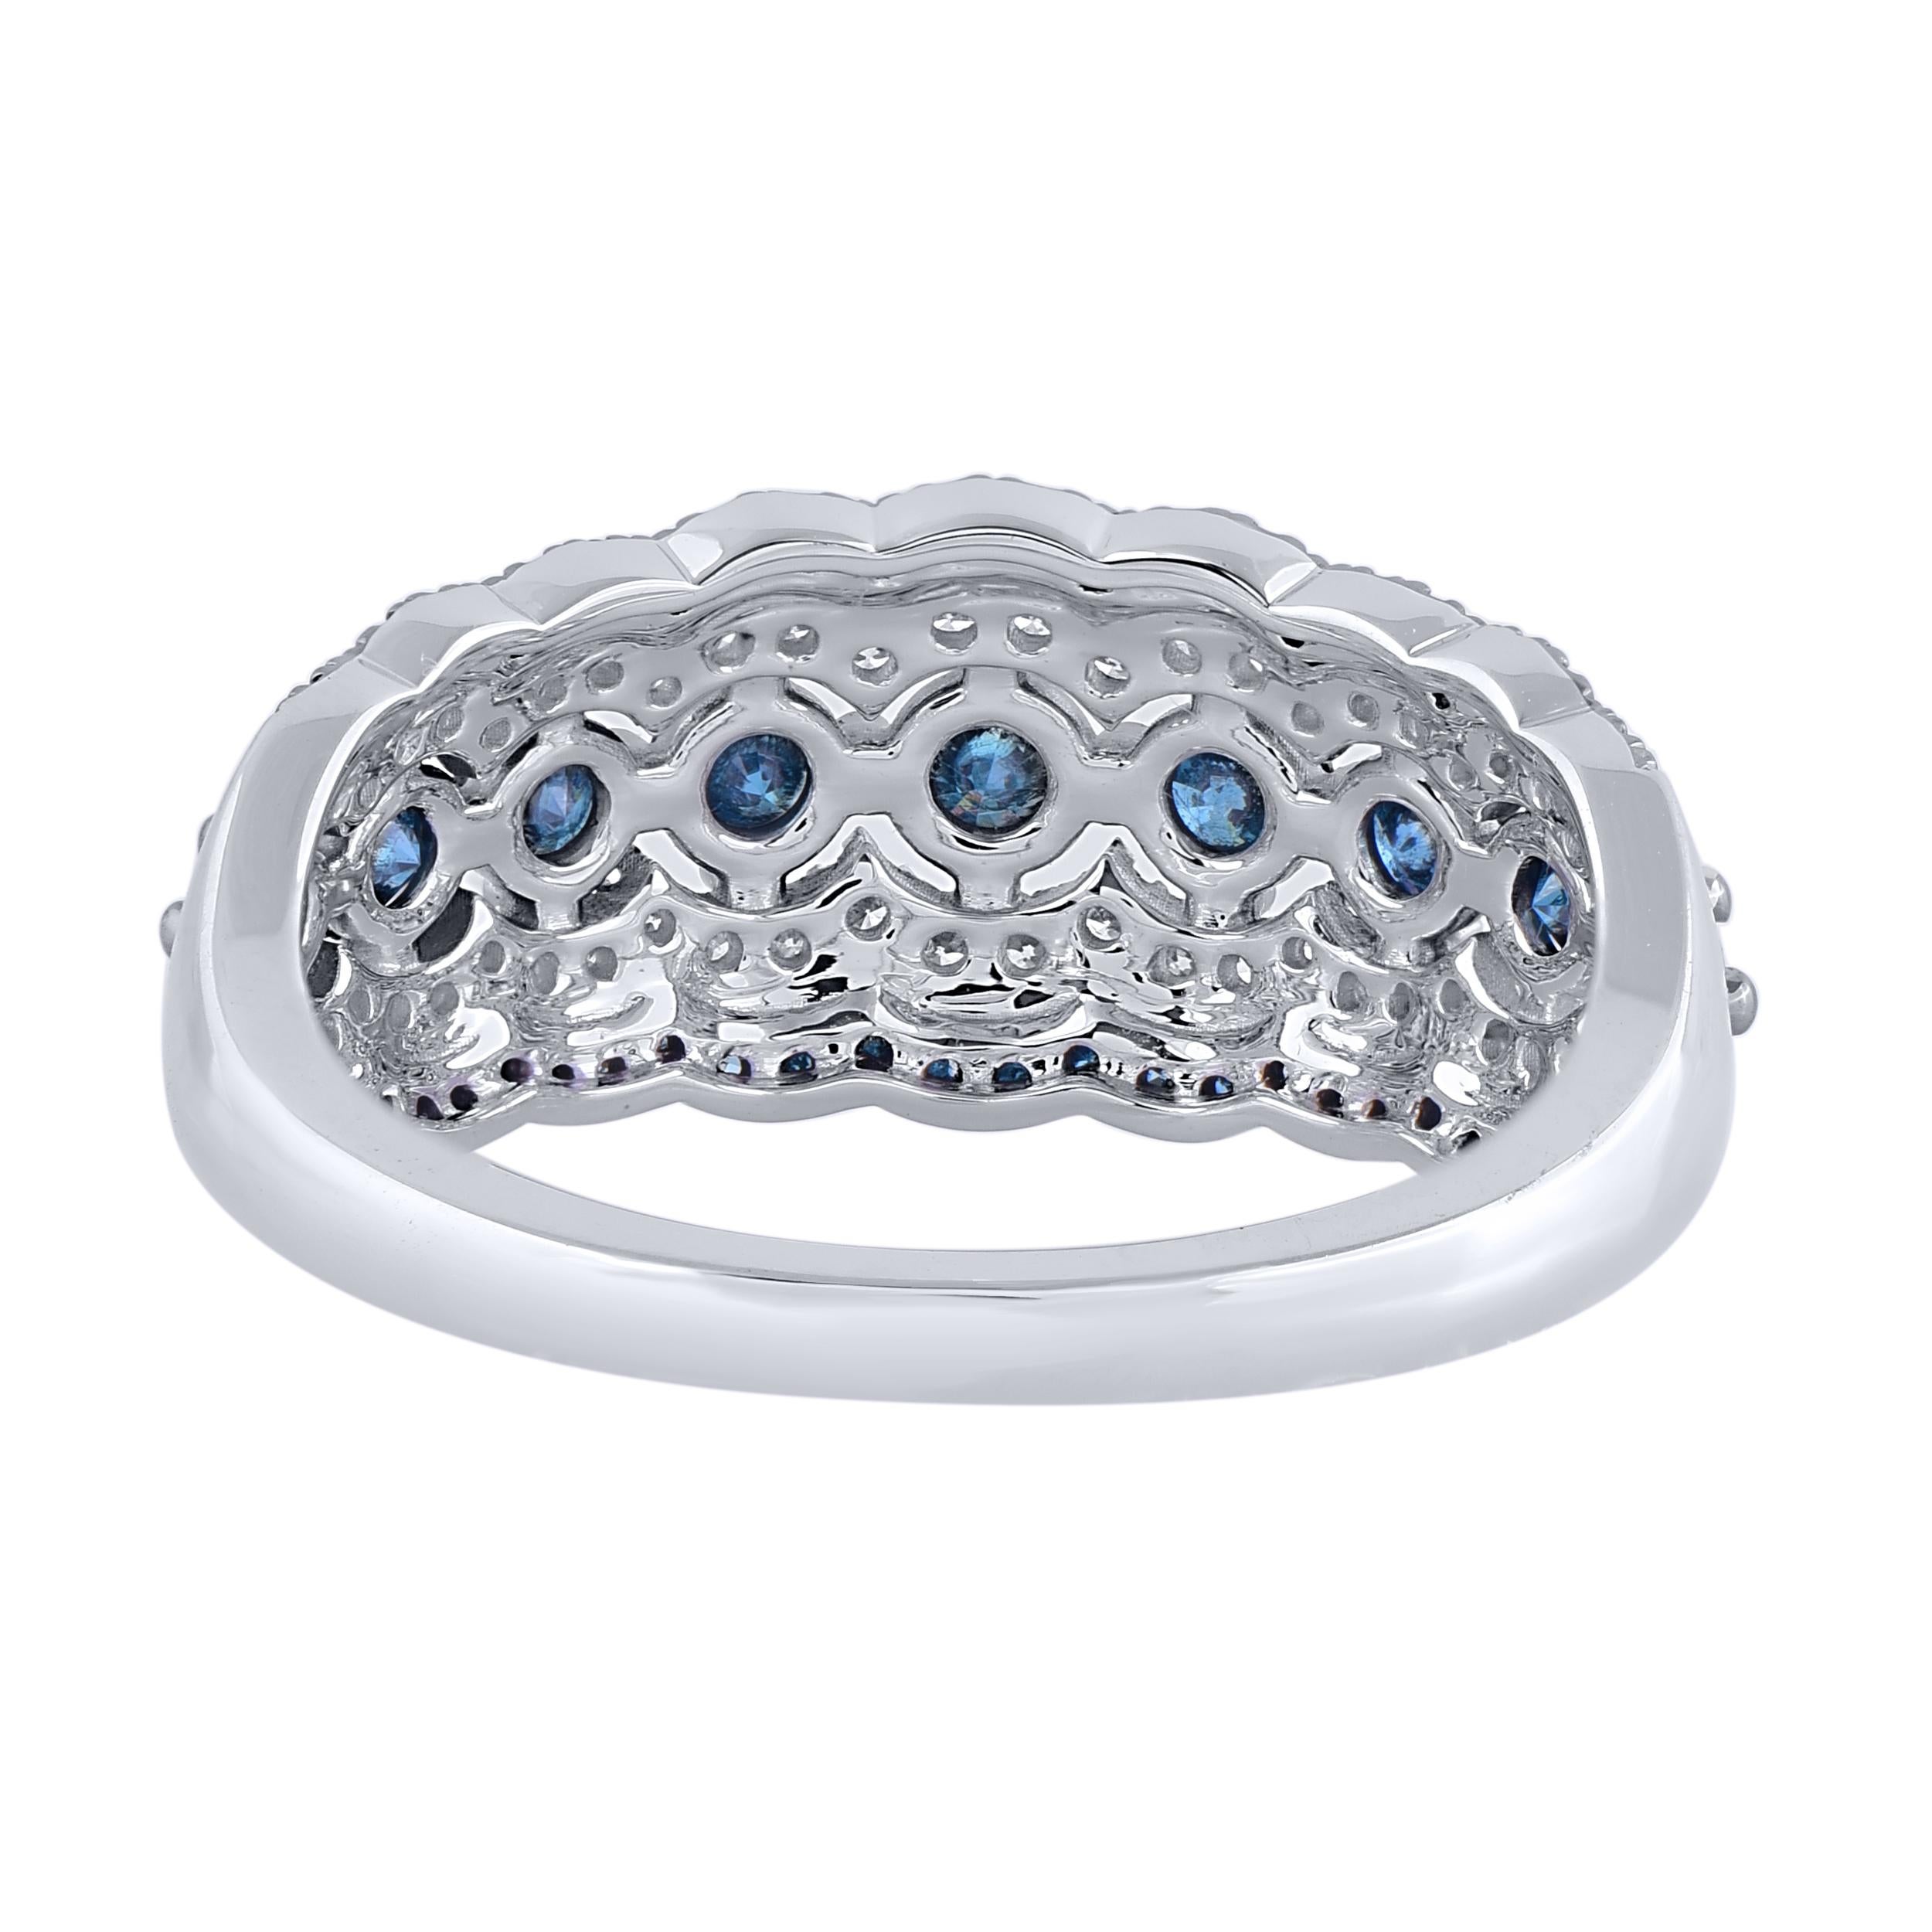 Elegantly designed by our skillful artisans in 14 Karat white gold and studded with 109 brilliant cut round white diamond and blue treated diamond in prong setting. Total diamond weight is 1.0 carat. Diamonds are graded H-I color, I-2 clarity. An